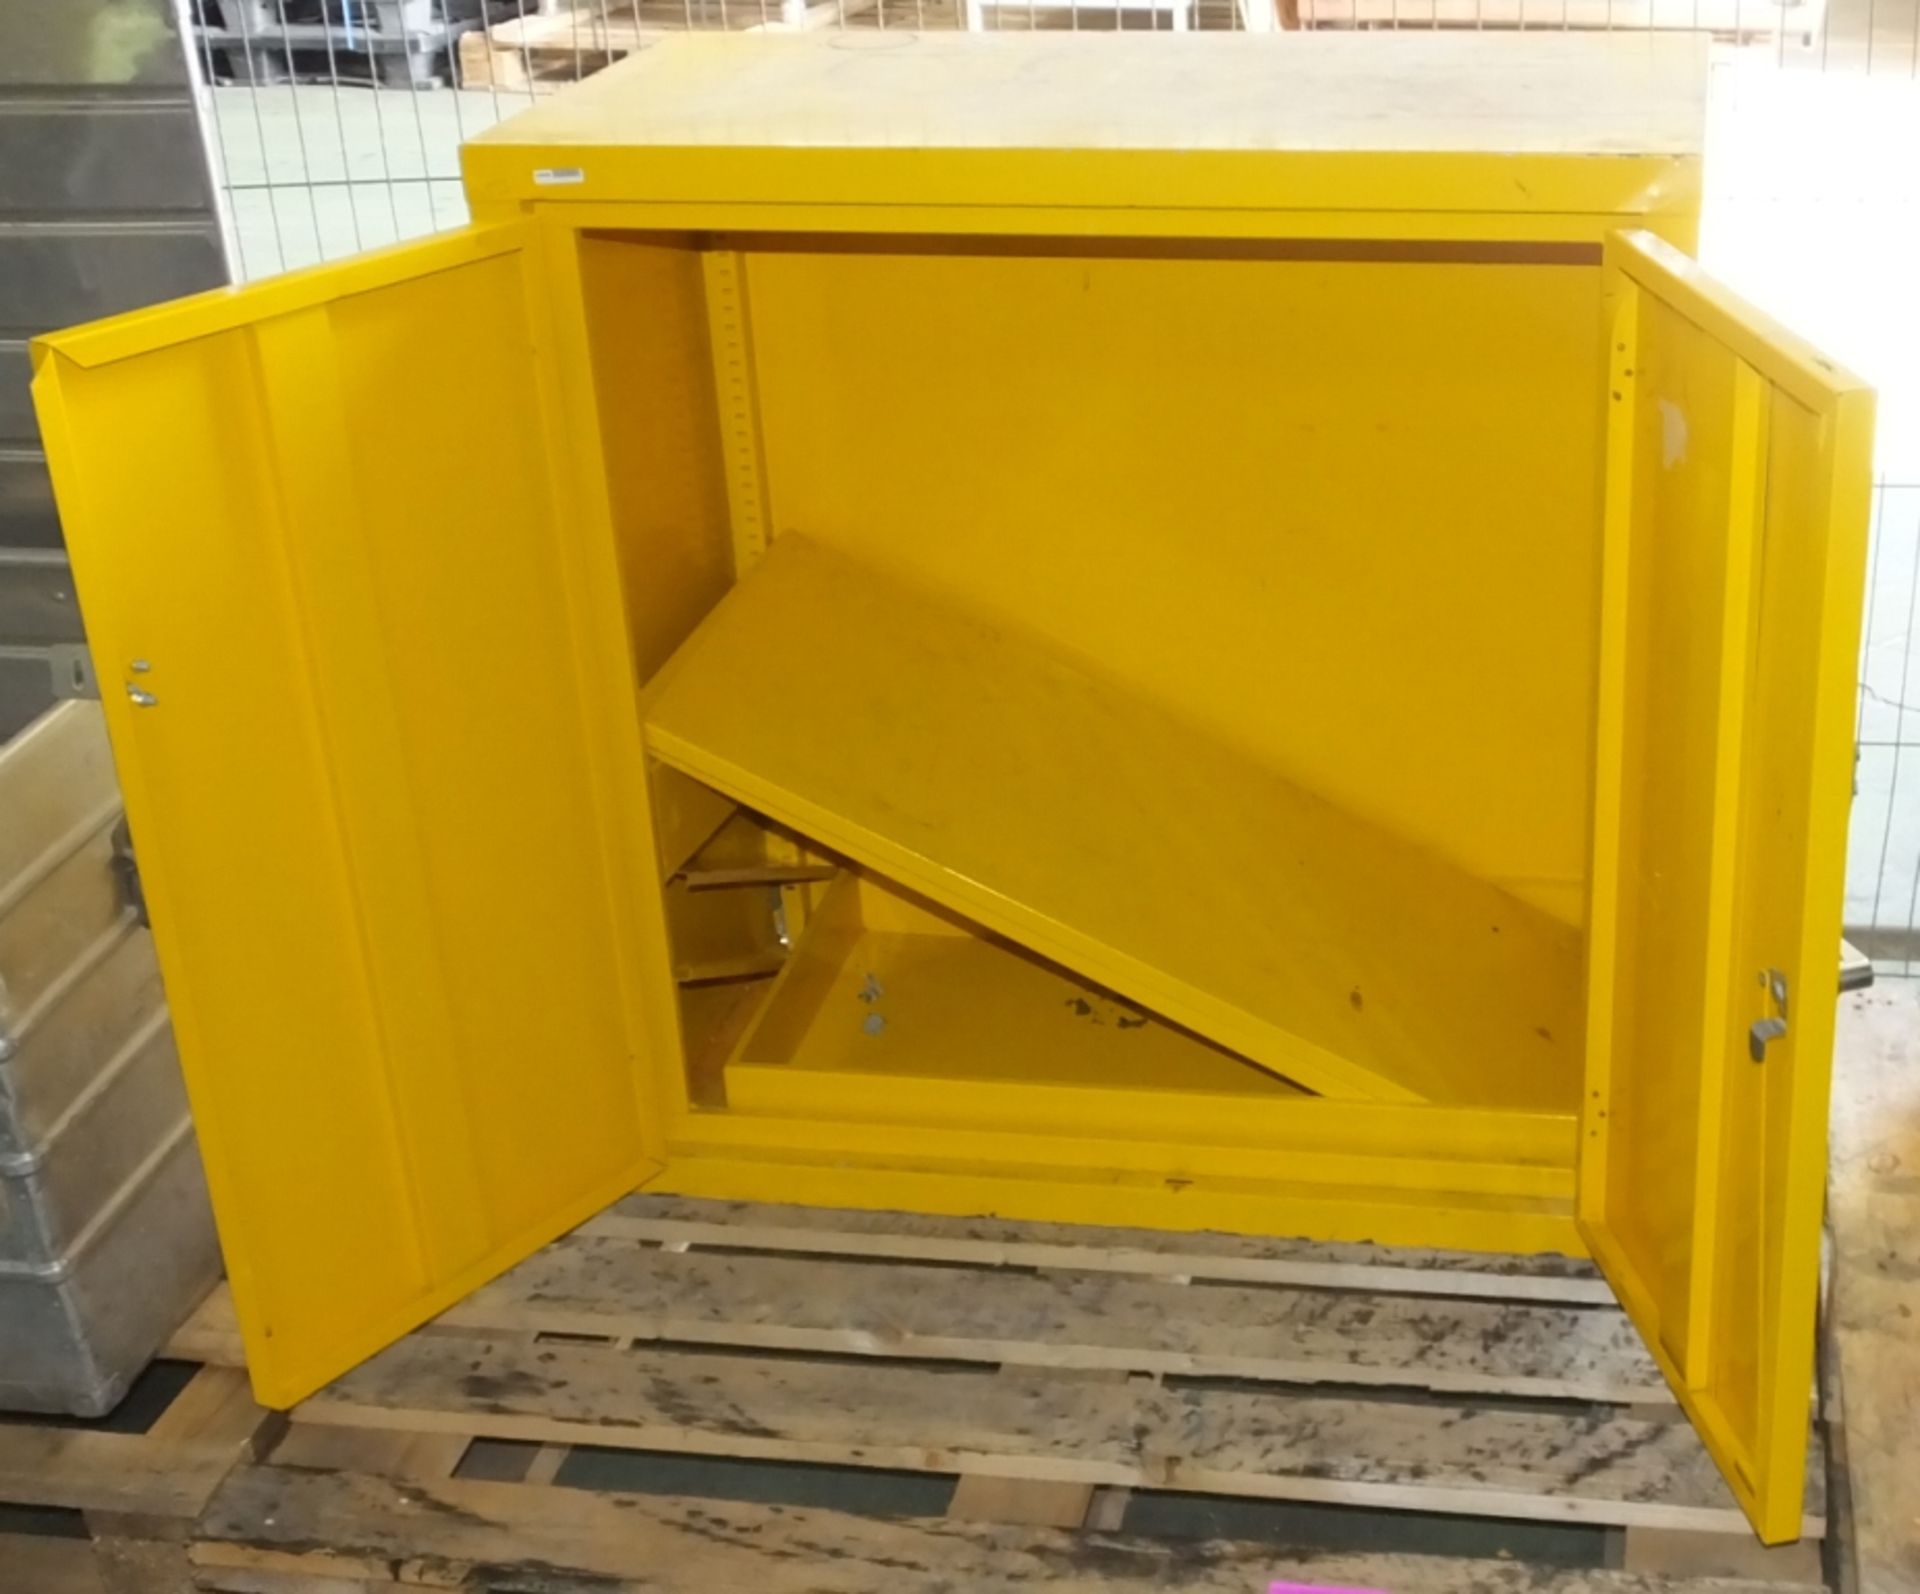 Yellow Cabinet With Shelves - Chemical Store - L920 x W490 x H920mm